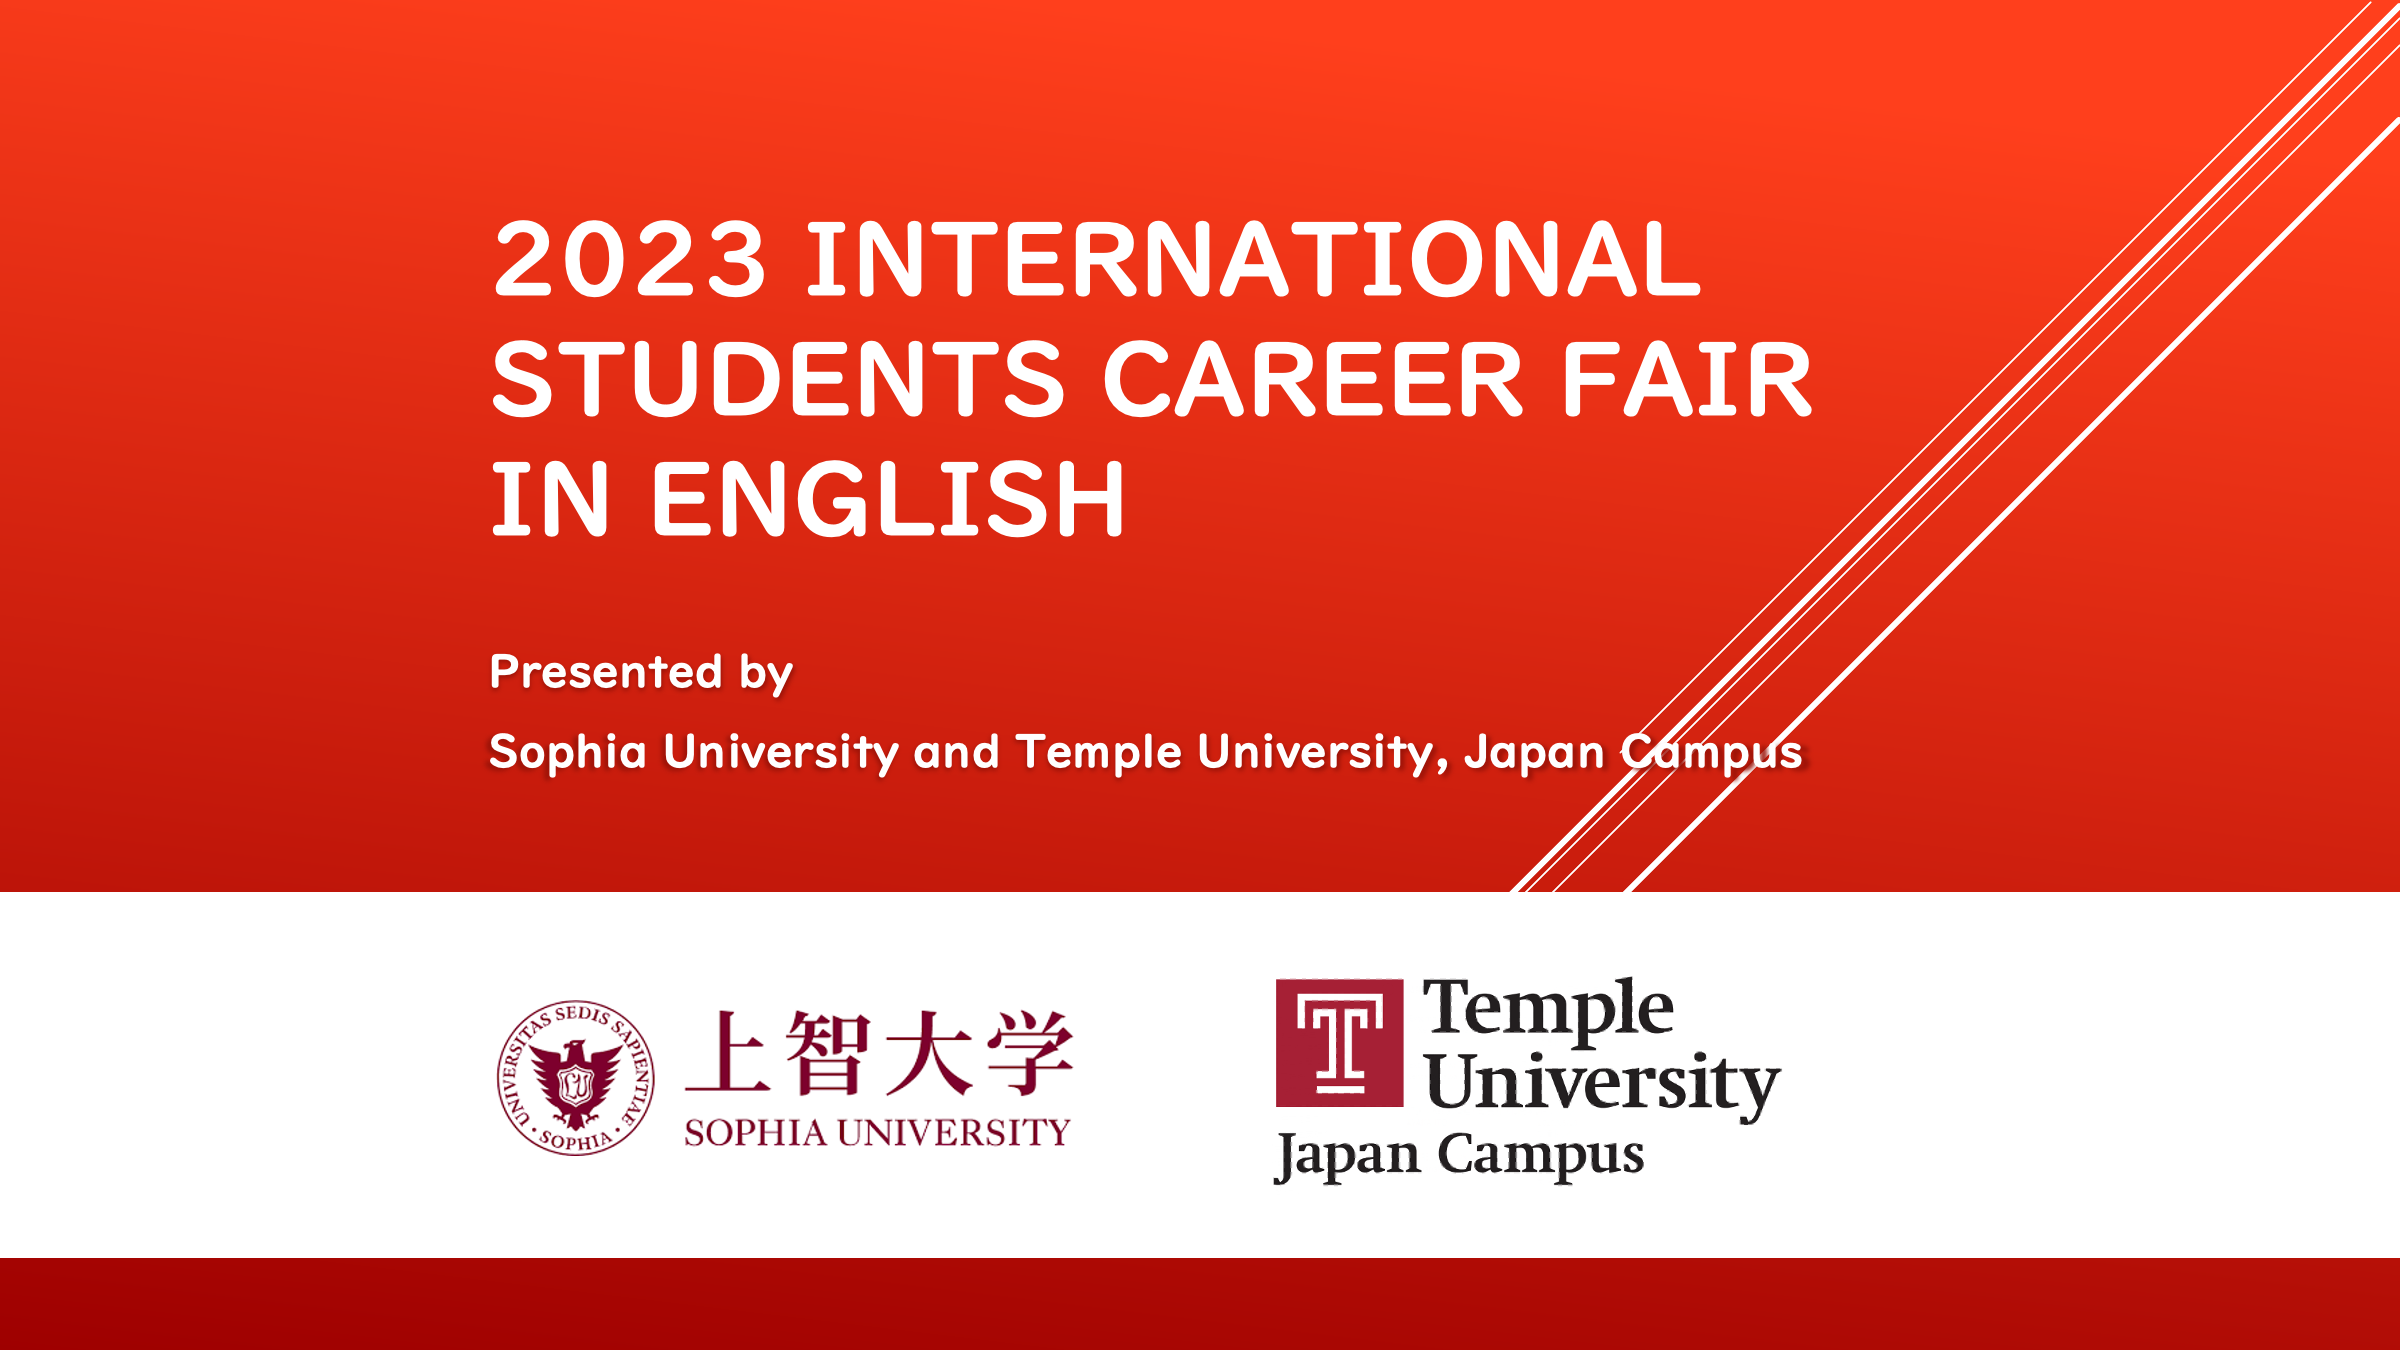 Sophia University and Temple University, Japan Campus (TUJ) successfully concluded their virtual career fair on October 11, 2023